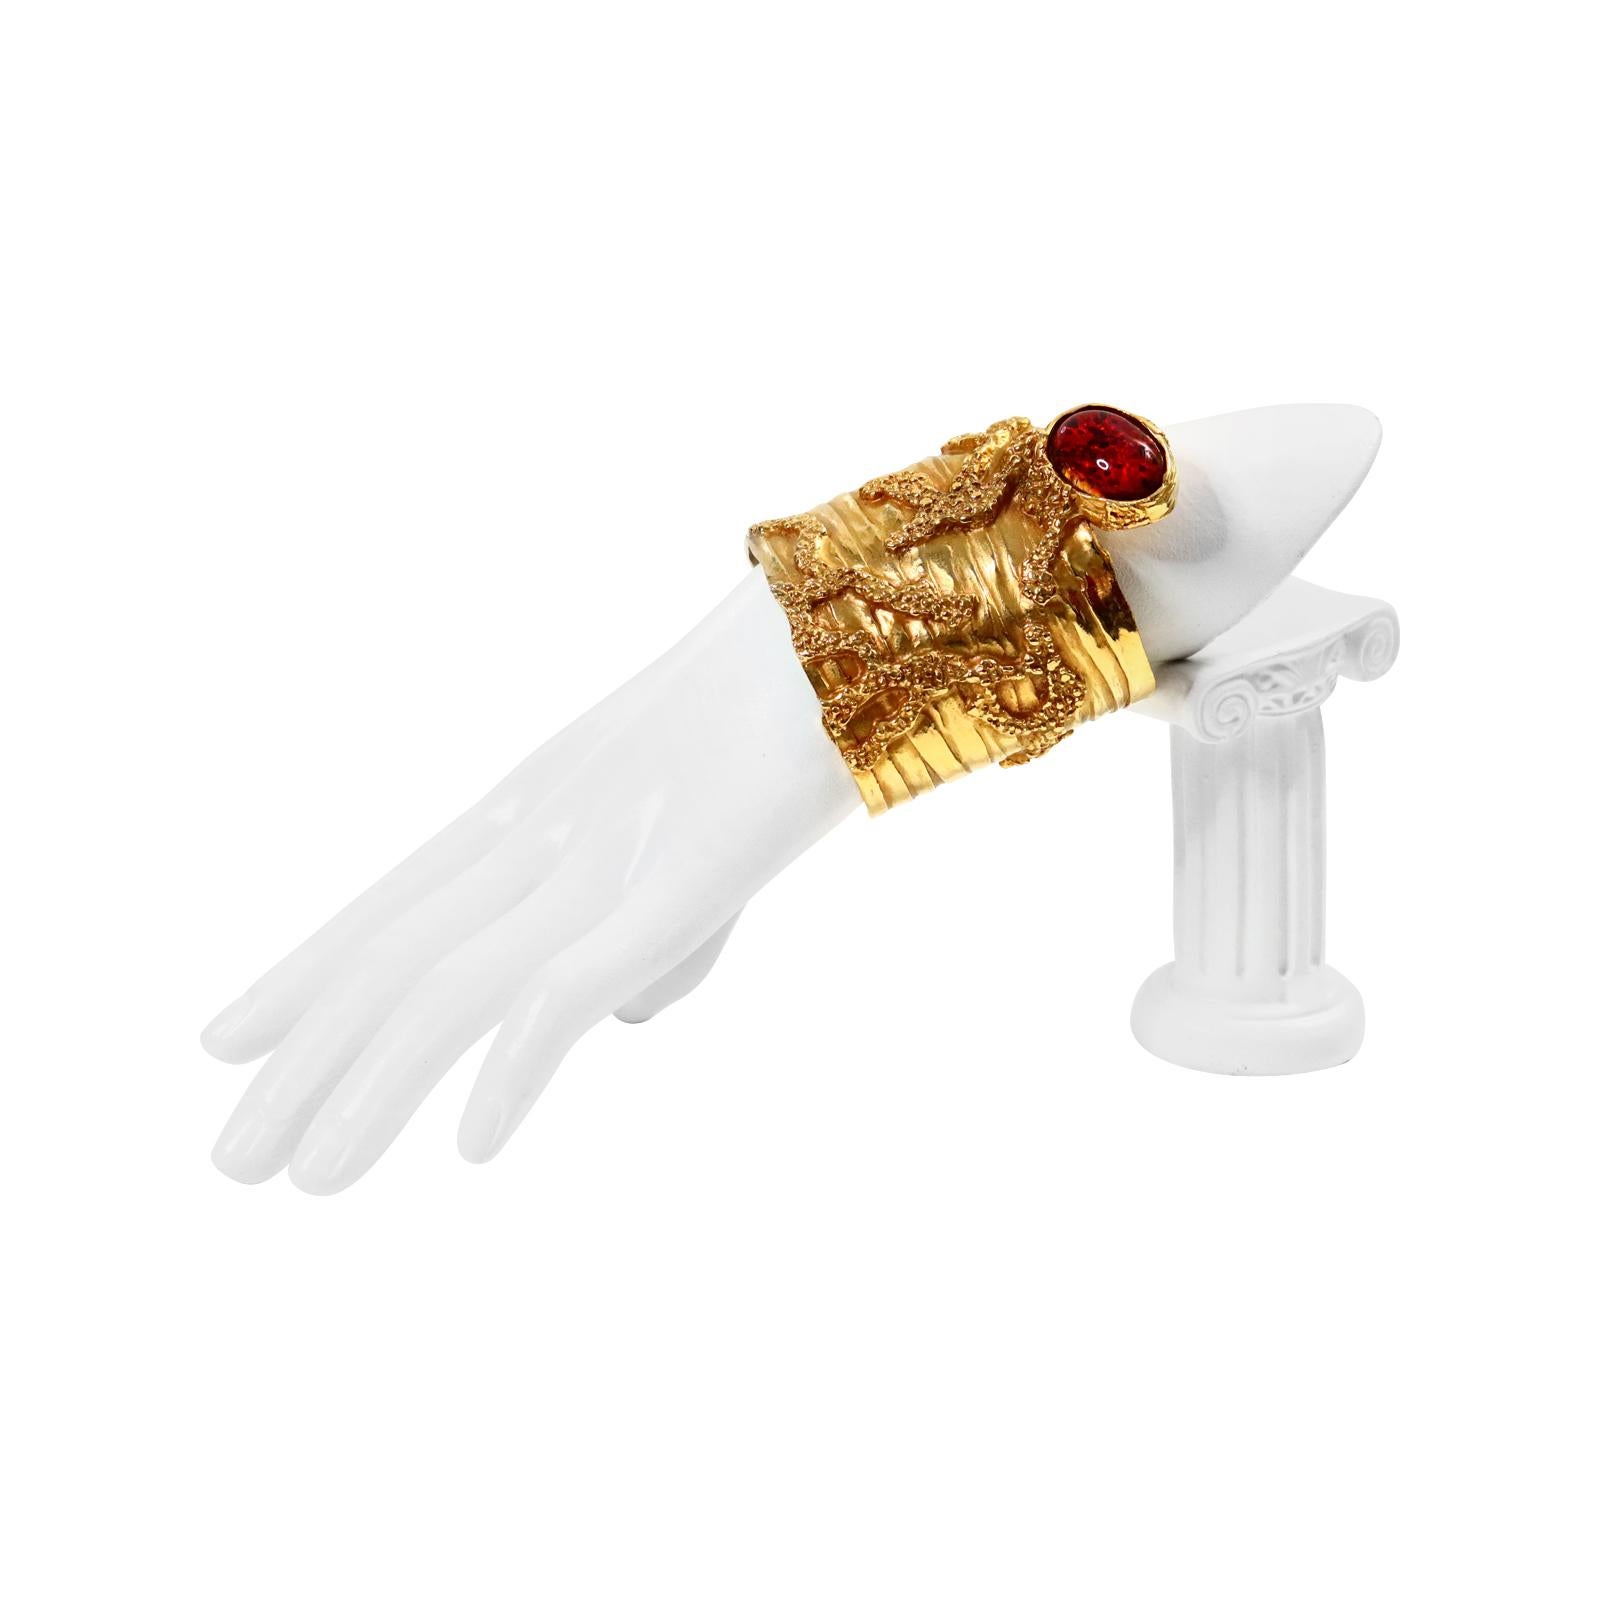 Vintage YSL Yves Saint Laurent Gold With Red Pate De Vere From the Collection Arty Circa 2000s.  This gorgeous Cuff has raised detail all over the cuff. Almost looks like creeping branches coming down and at the very end is the red pate de verre.  I